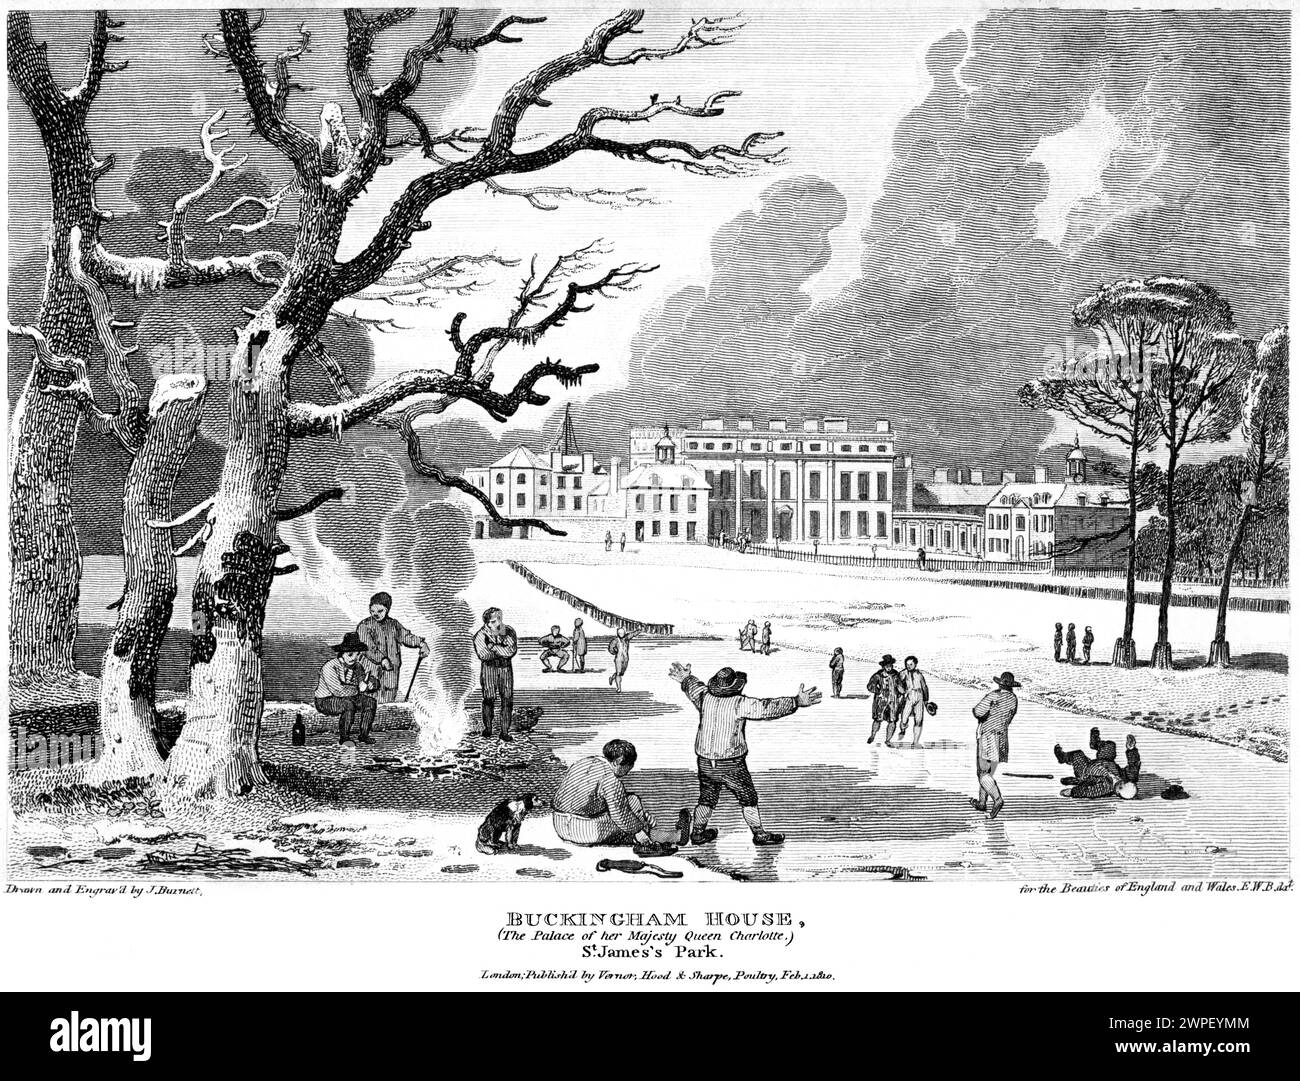 Engraving entitled Buckingham House (The Palace of her Majesty Queen Charlotte) St James Park, London UK scanned at high res a book of 1815. Stock Photo